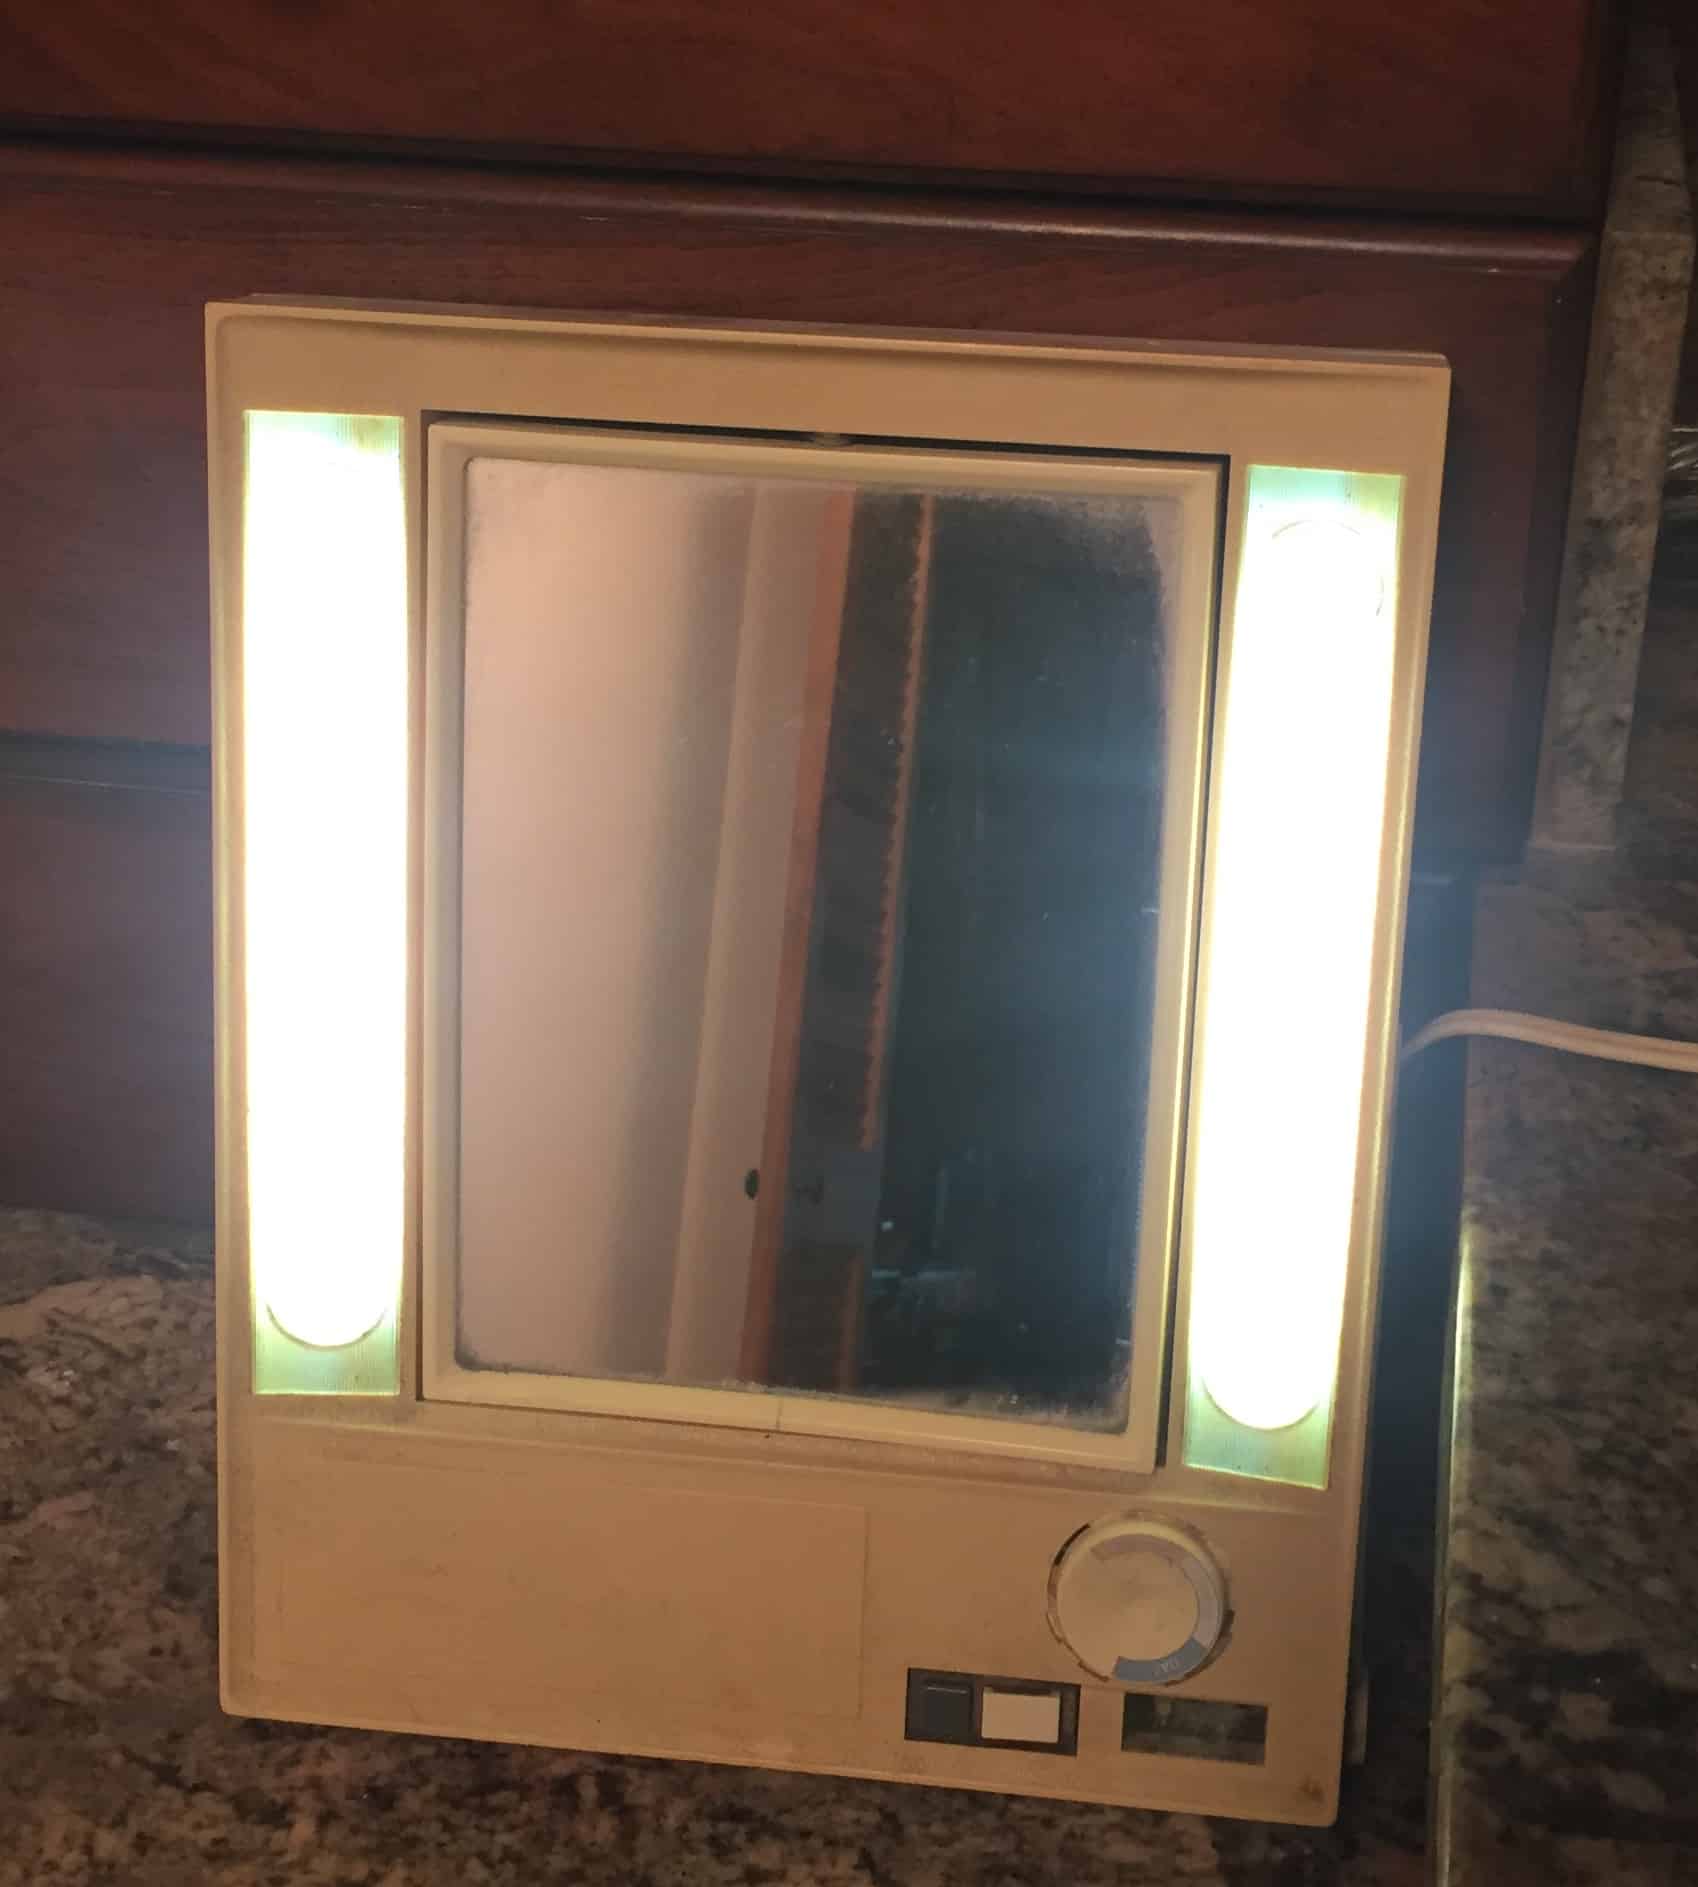 An old lighted make-up mirror, for essay on the face in the mirror.